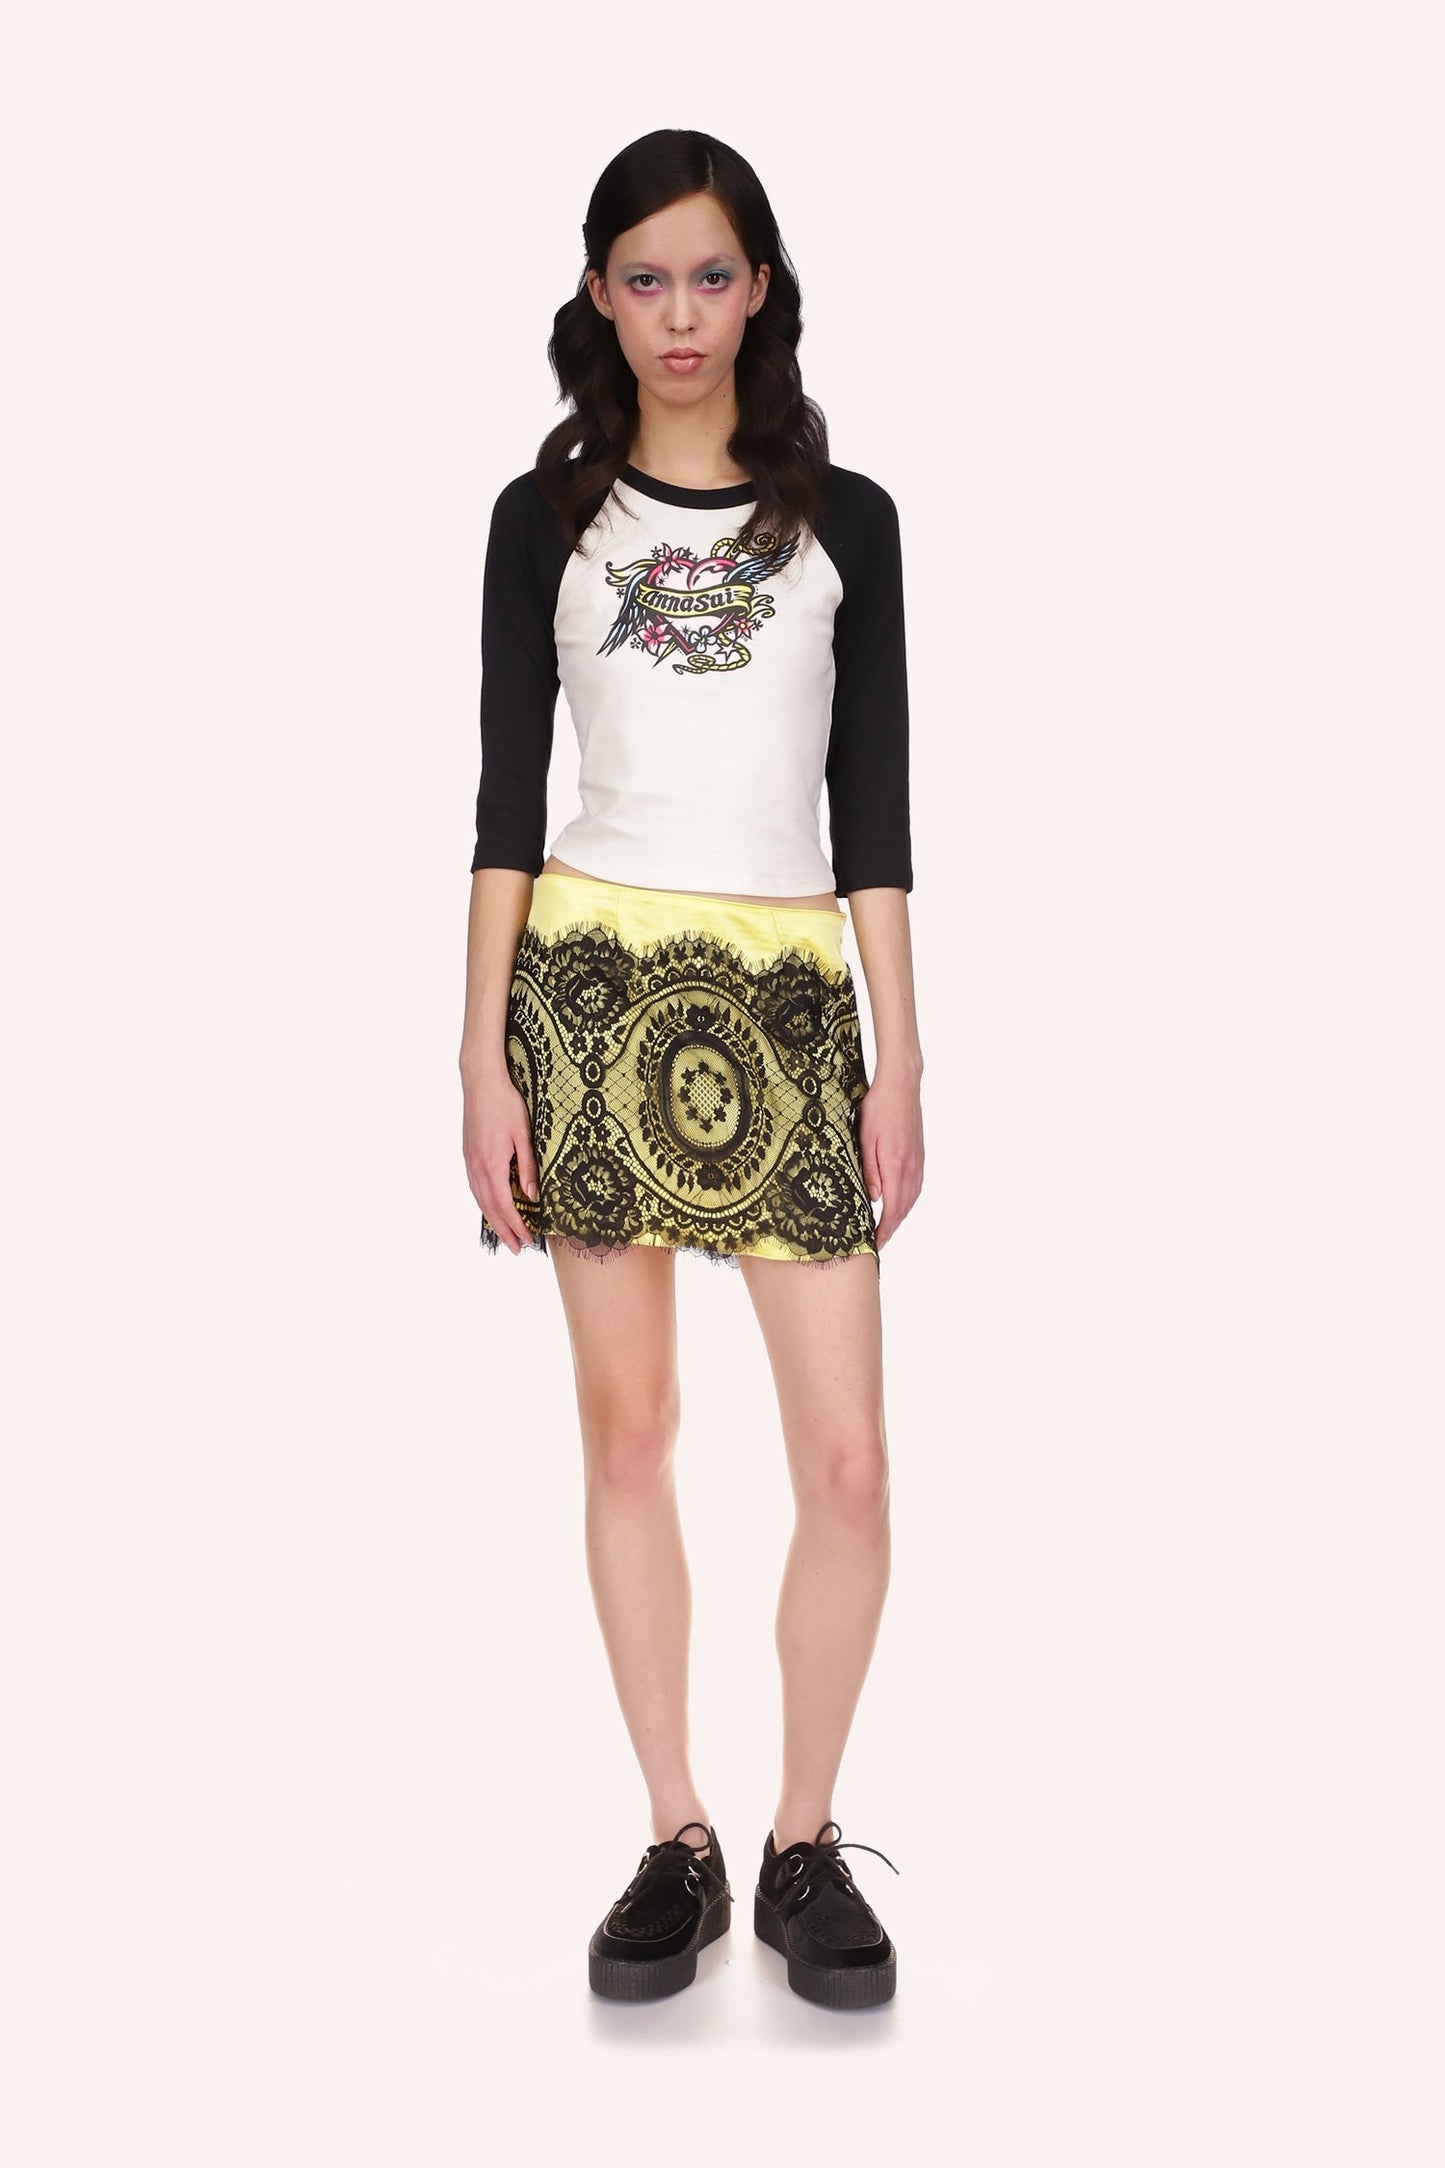  Cropped Tee, black Three Quarter Sleeve, with an heart with wings, floral design and Anna Sui on a banner on white